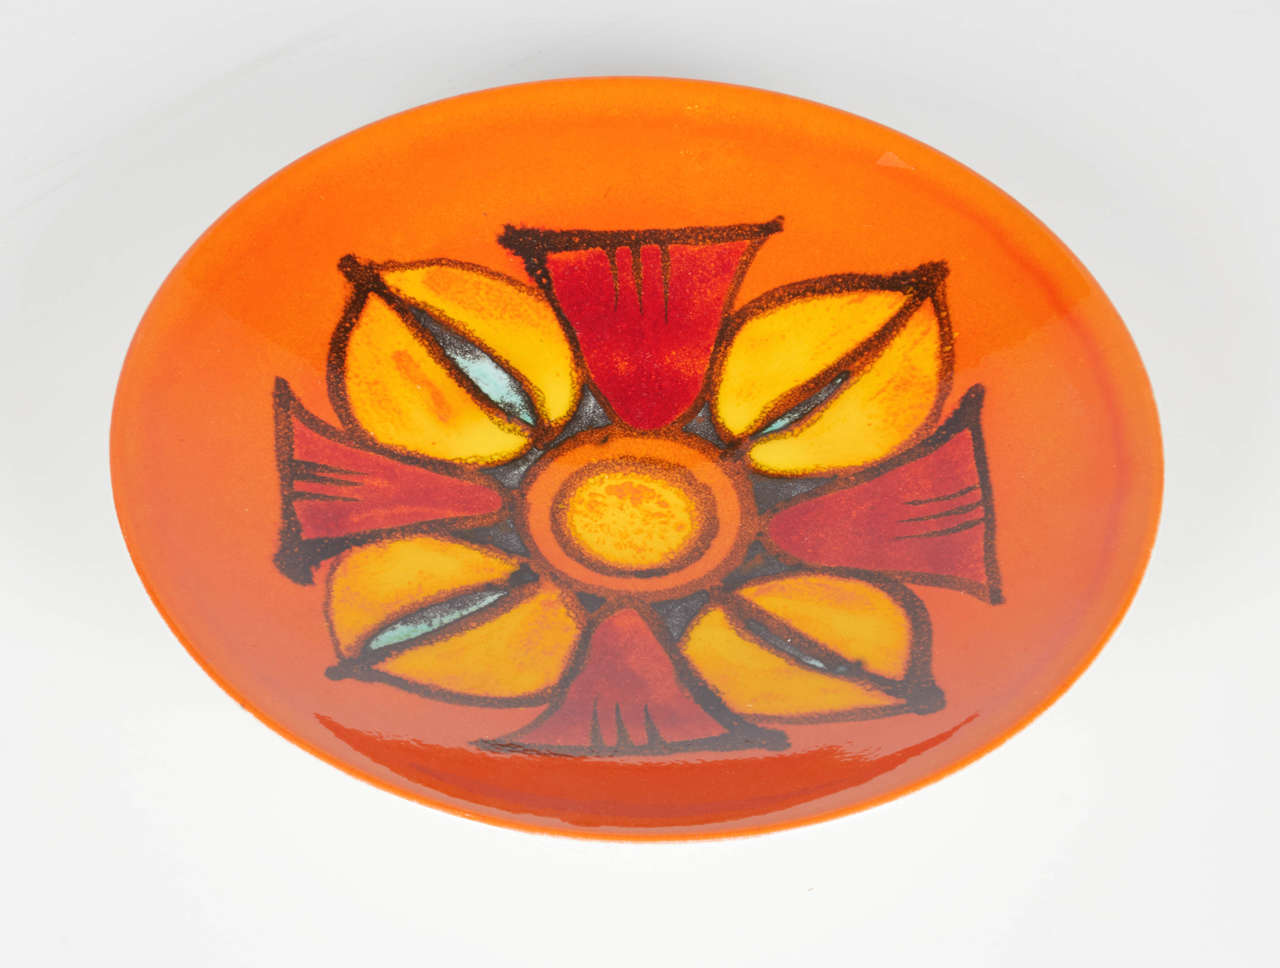 Beautiful and vibrant bowl by Poole of England. This is an example from their 